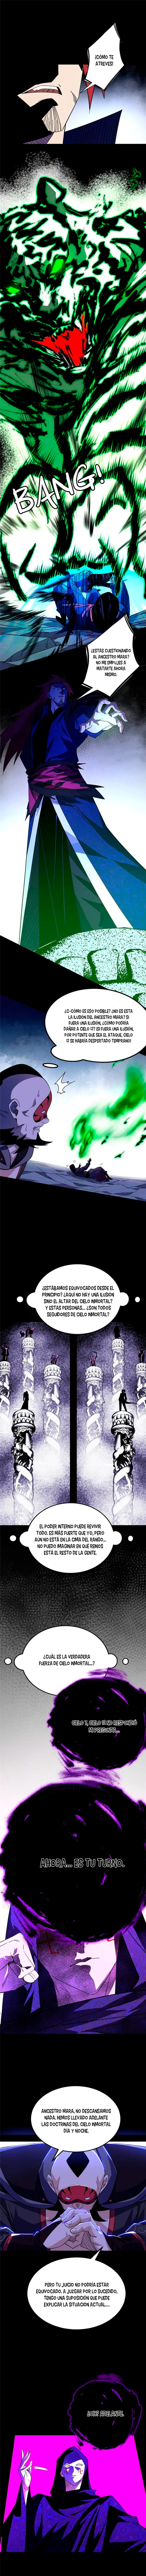 Manga Soy un dios maligno Chapter 320 image number 3